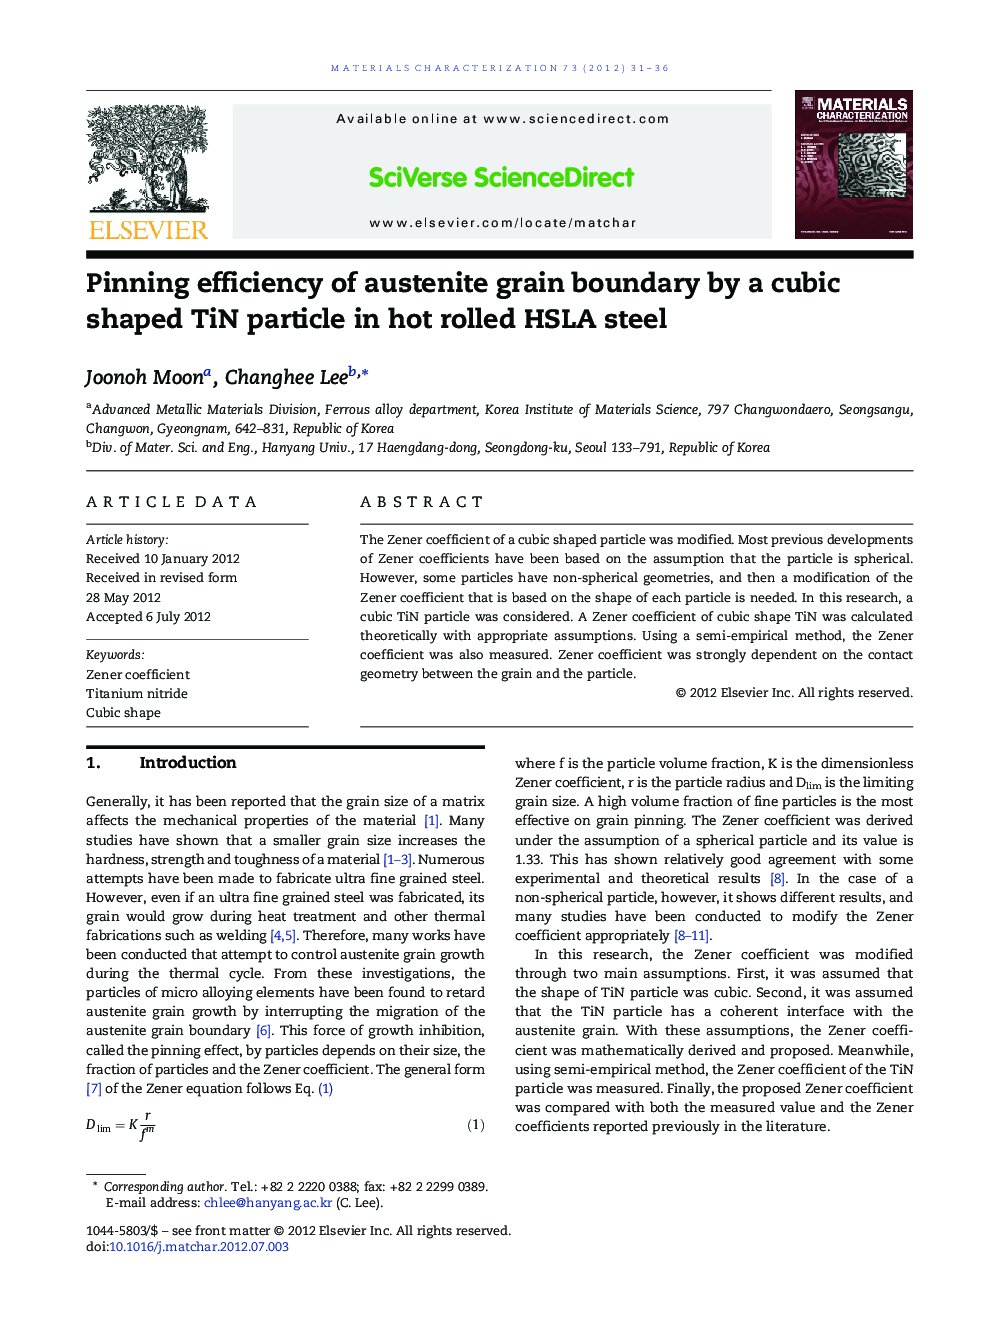 Pinning efficiency of austenite grain boundary by a cubic shaped TiN particle in hot rolled HSLA steel